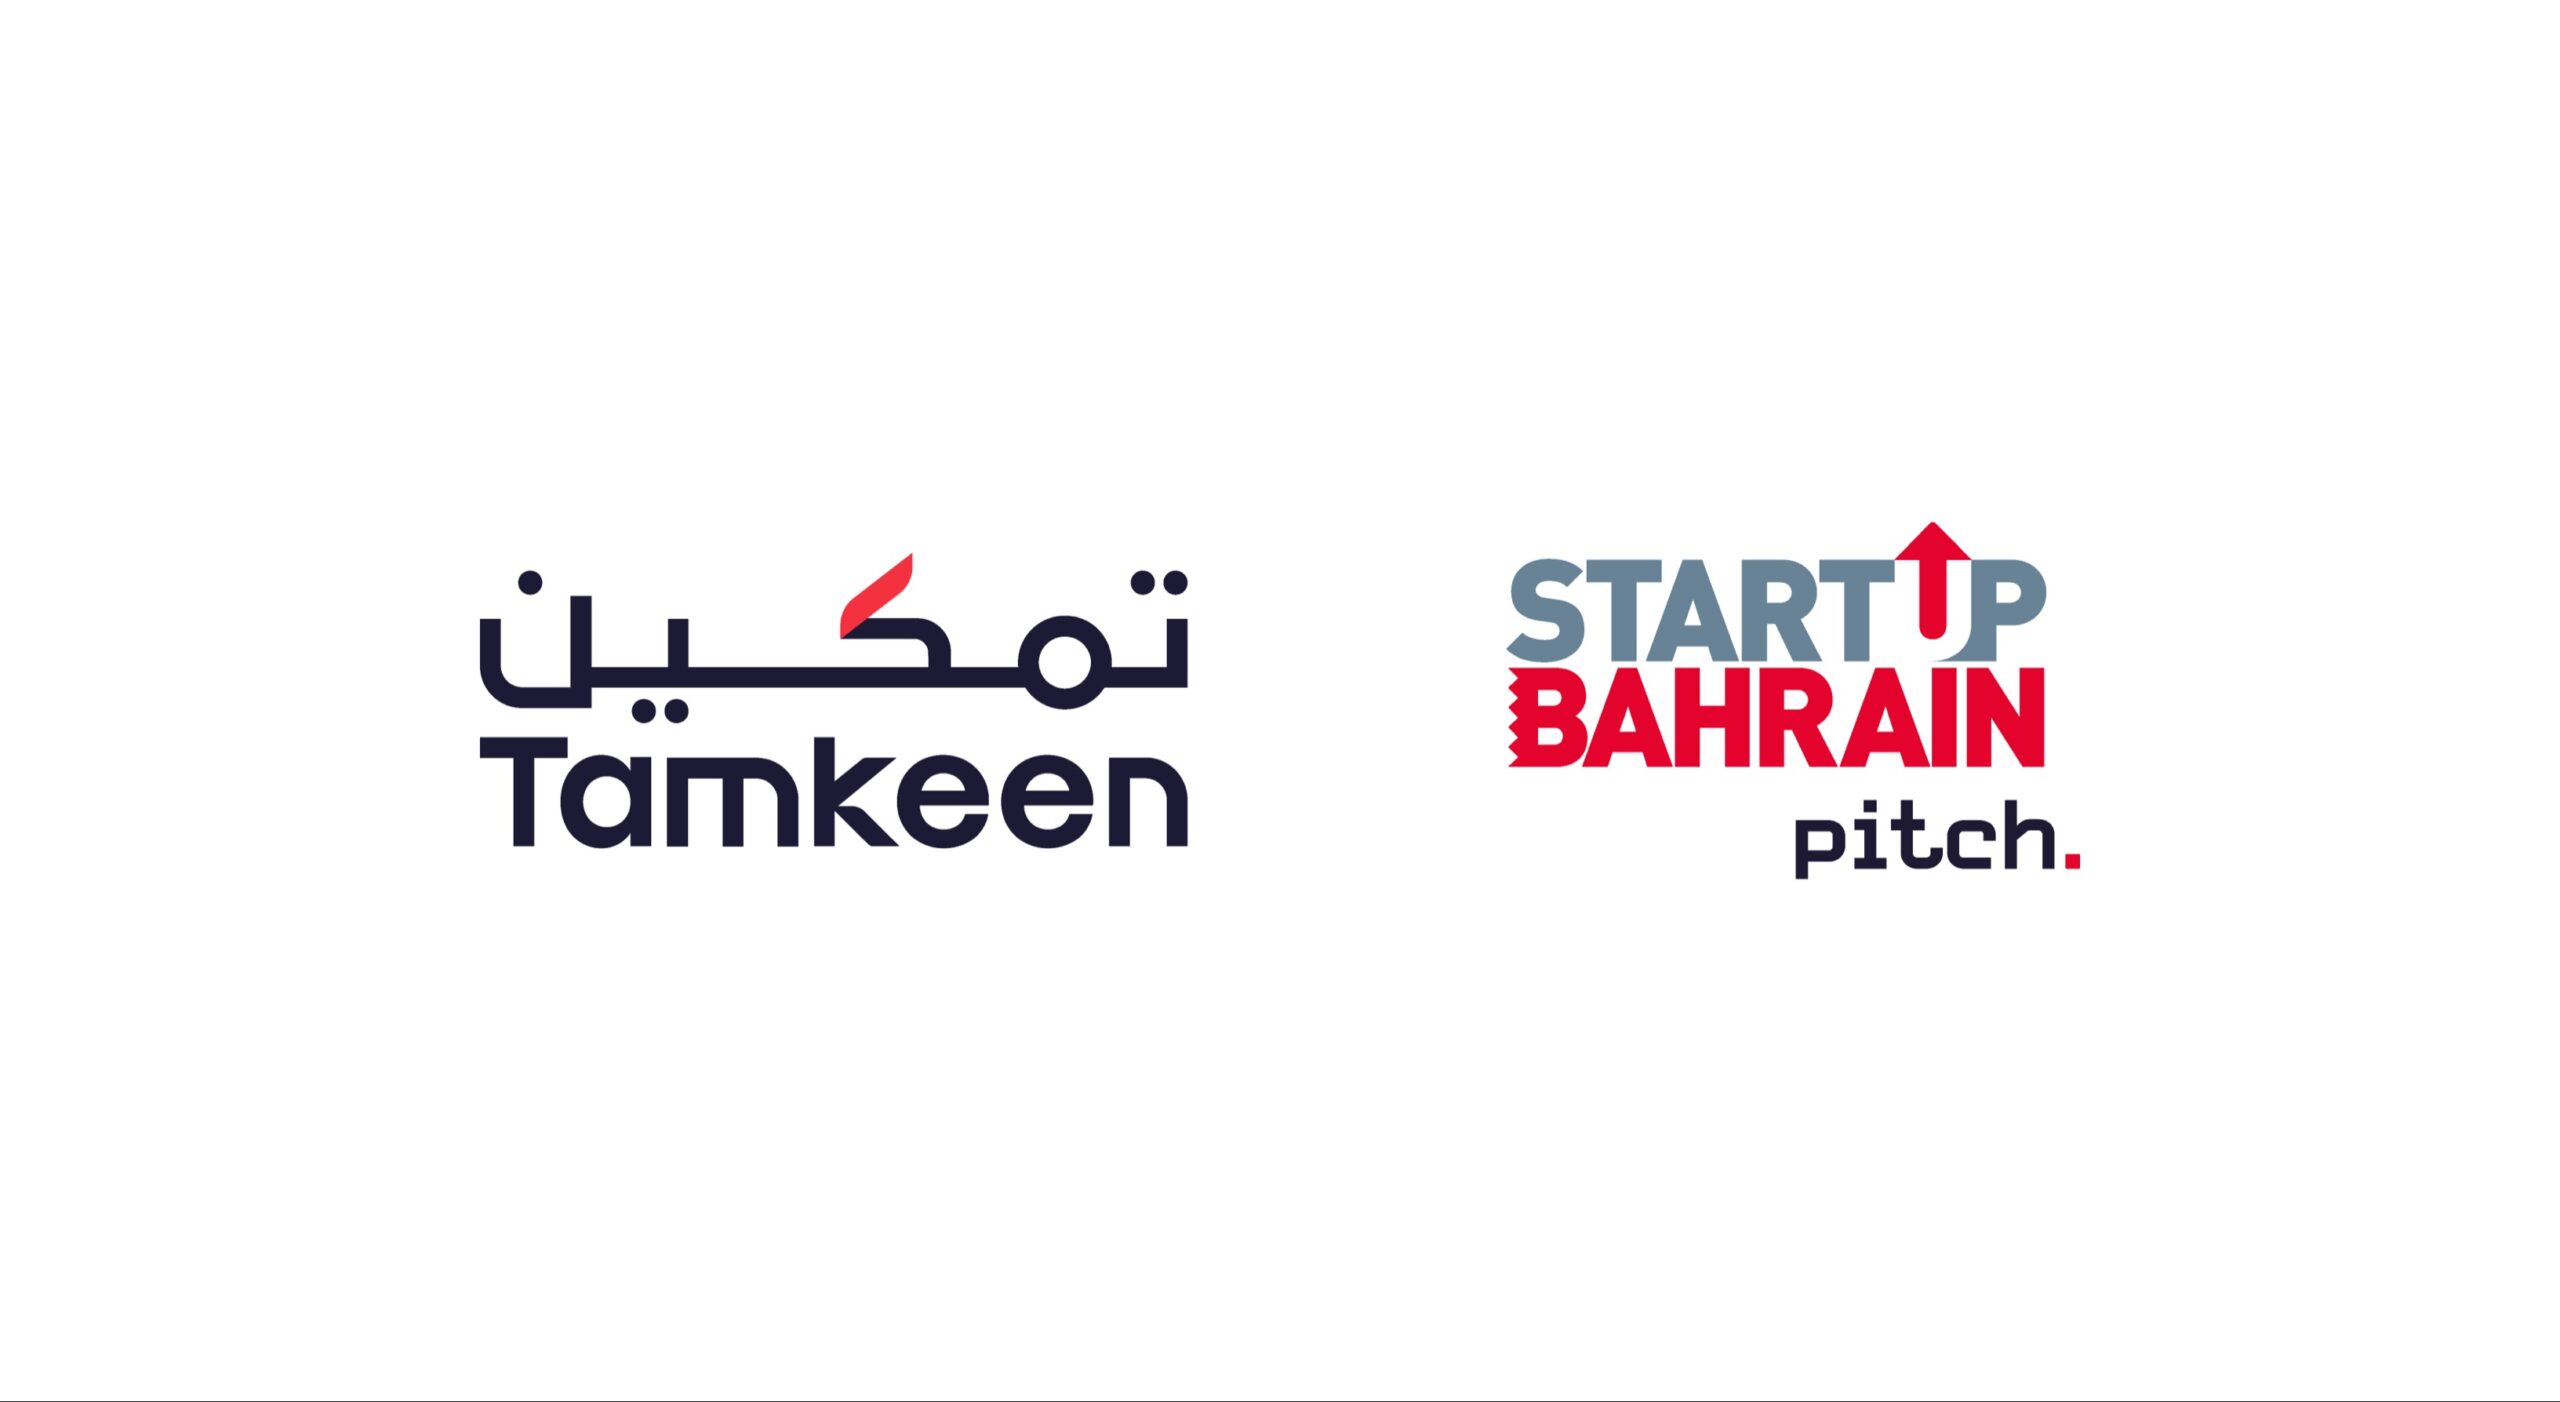 To foster a strong startup ecosystem and empower entrepreneurs     Tamkeen Announces a Pitching and Fundraising Training Program for Bahraini Entrepreneurs “StartUp Bahrain Pitch”